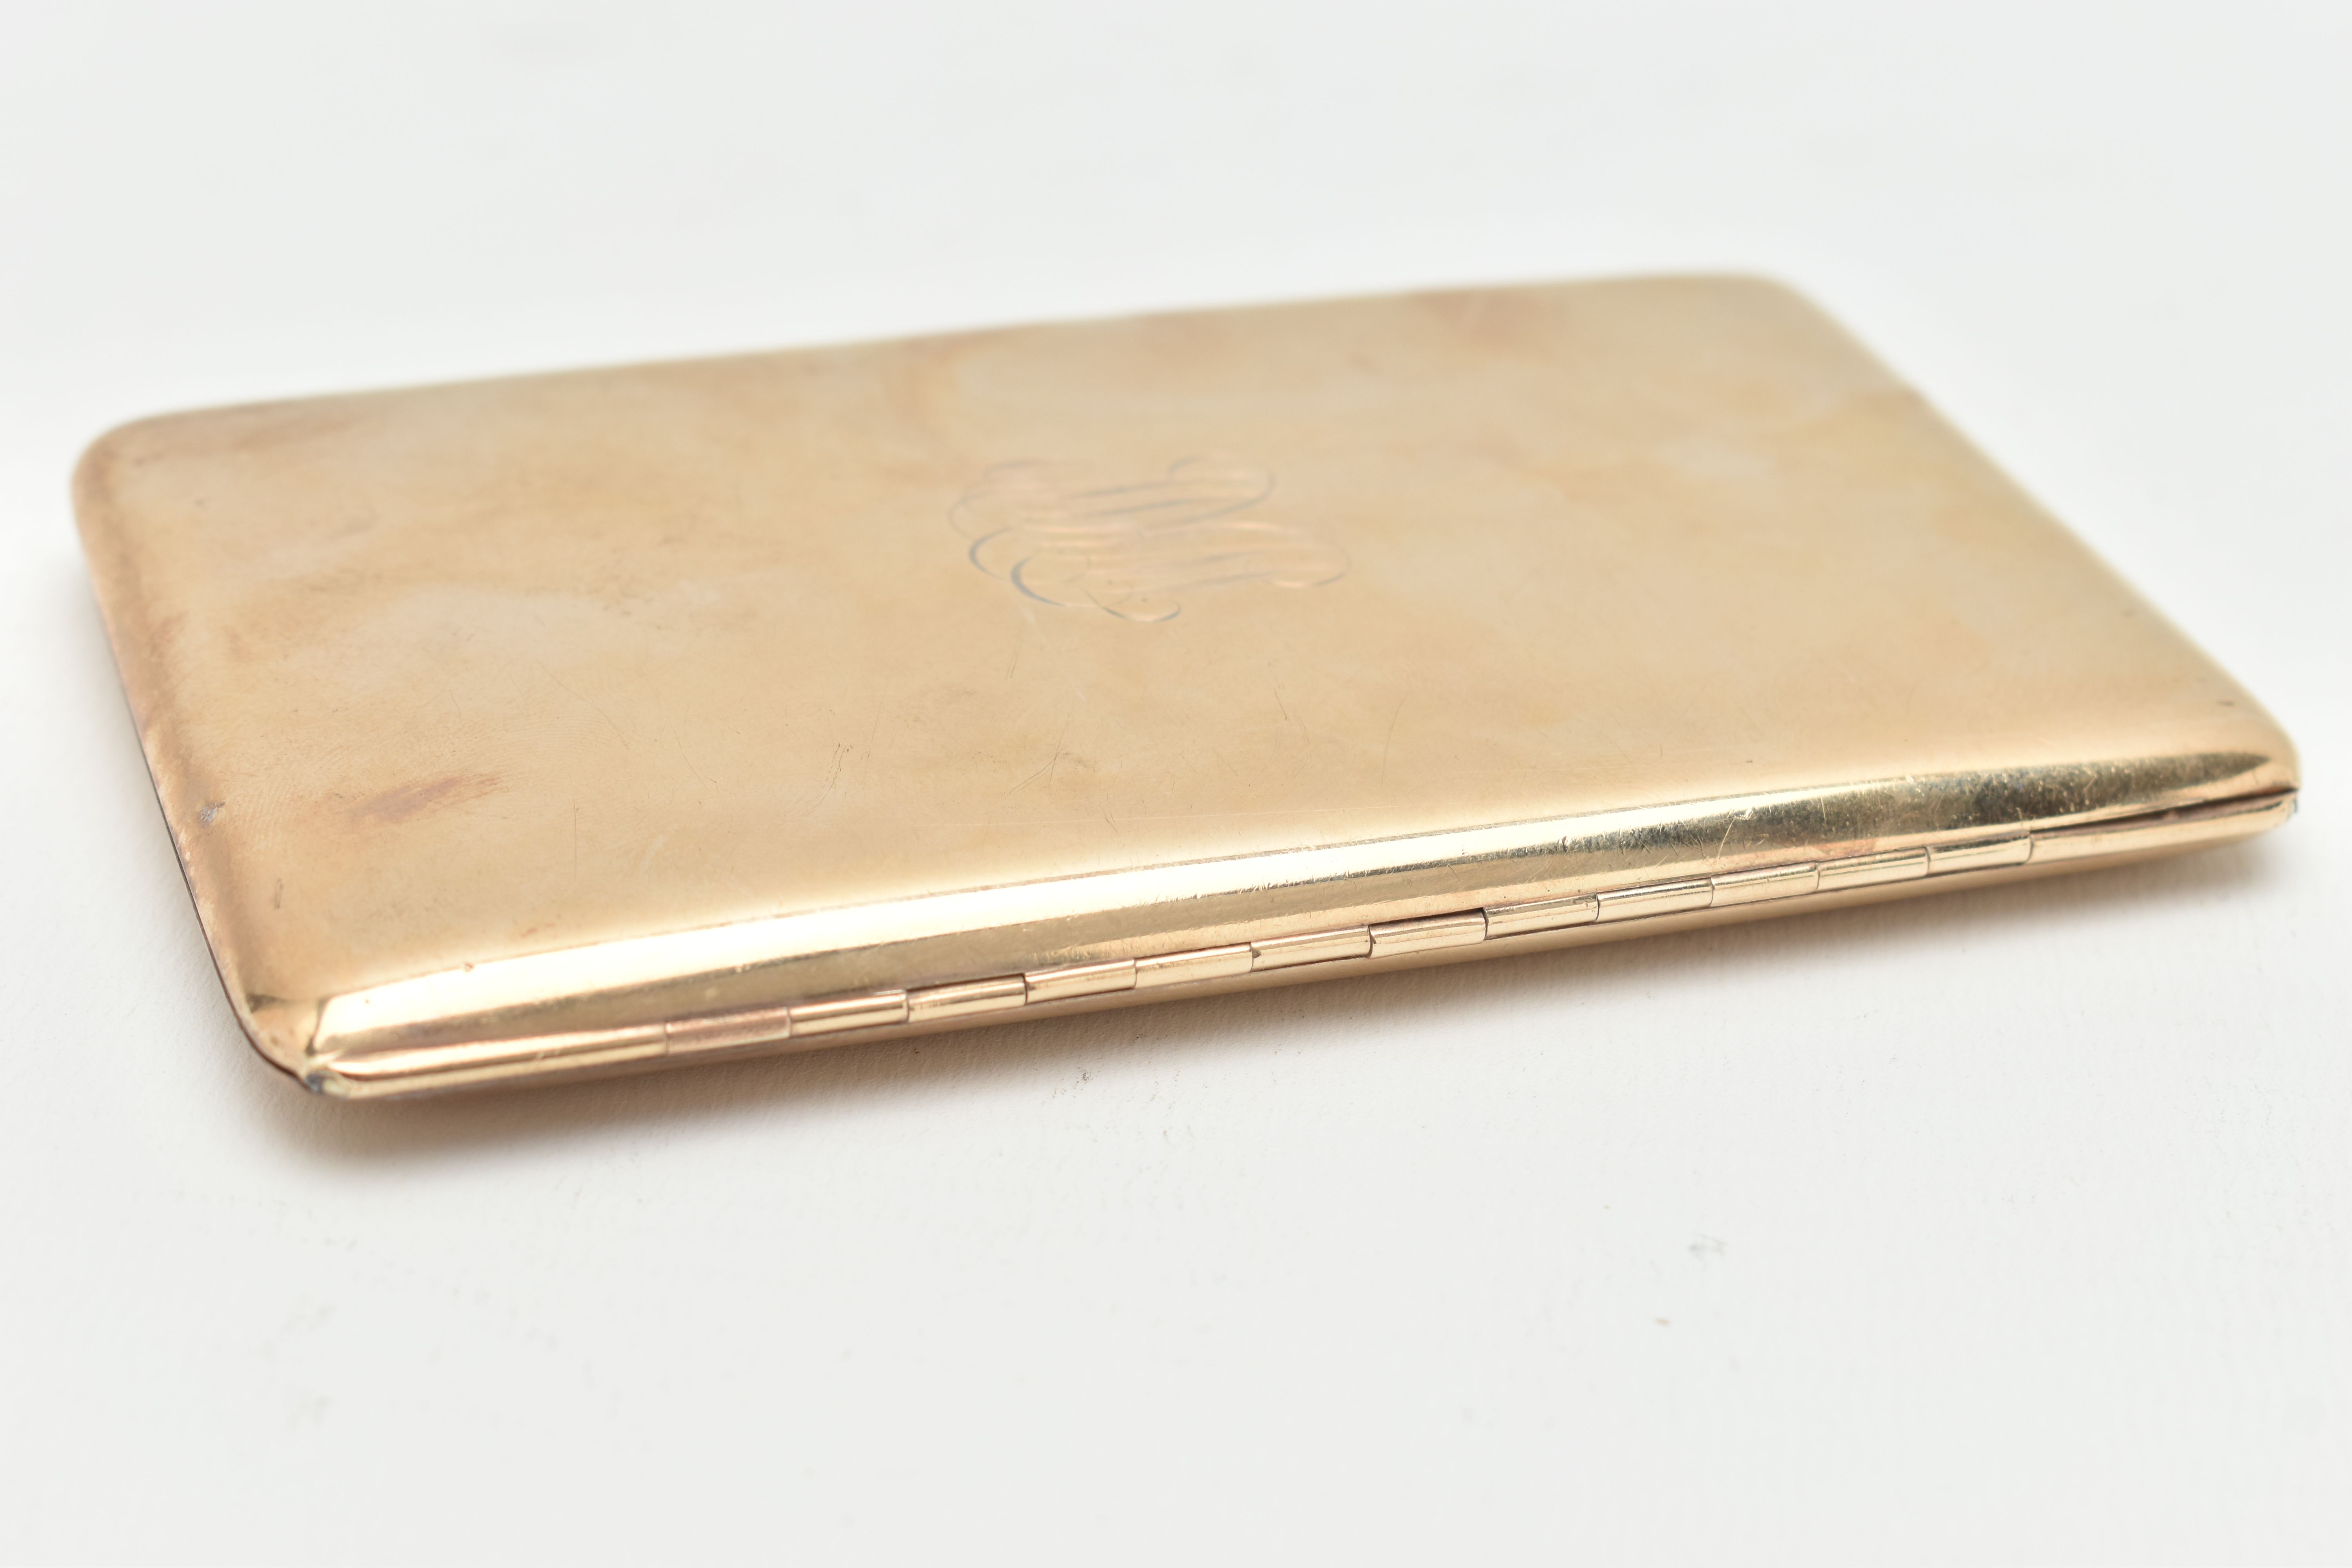 AN EARLY 20TH CENTURY, 9CT GOLD CIGARETTE CASE, of a rectangular form, polished design with - Image 4 of 6